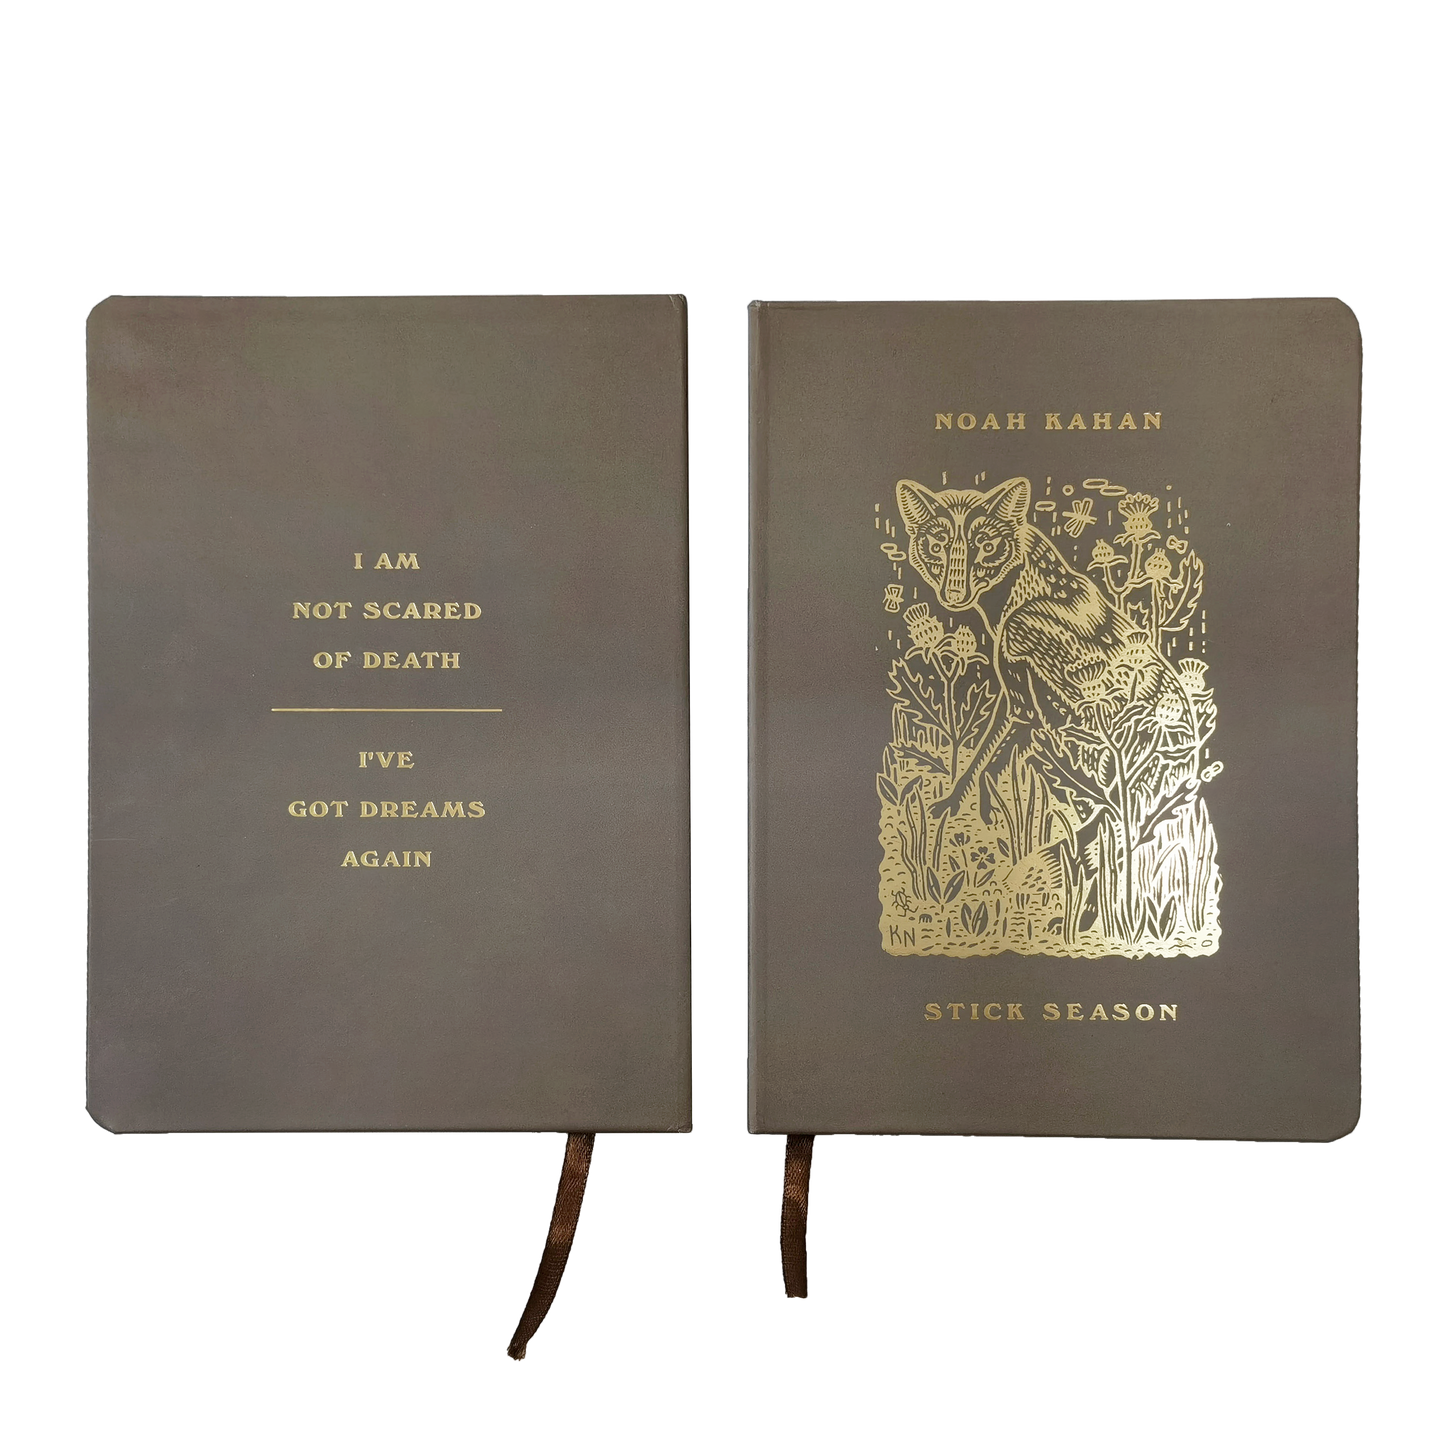 Noah Kahan brown journal with gold foil artwork on front and back. "I am not scared of death / I've got dreams again" on back. Fox and foliage art on front with ribbon bookmark. 